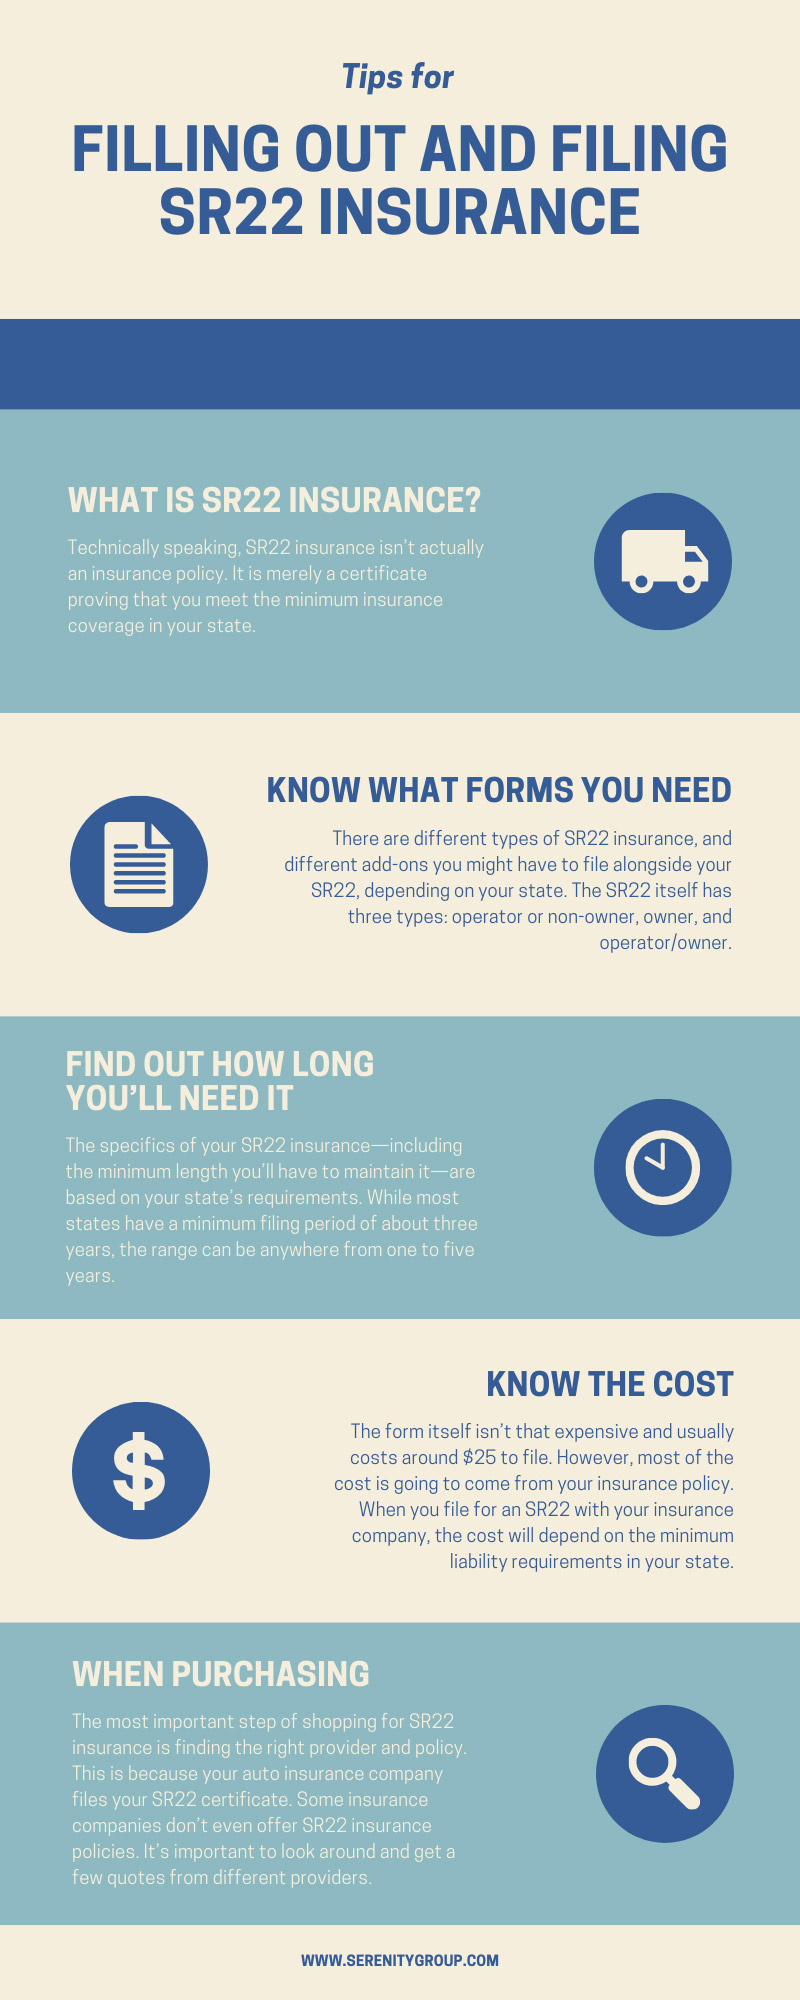 Tips for Filling Out and Filing SR22 Insurance infographic